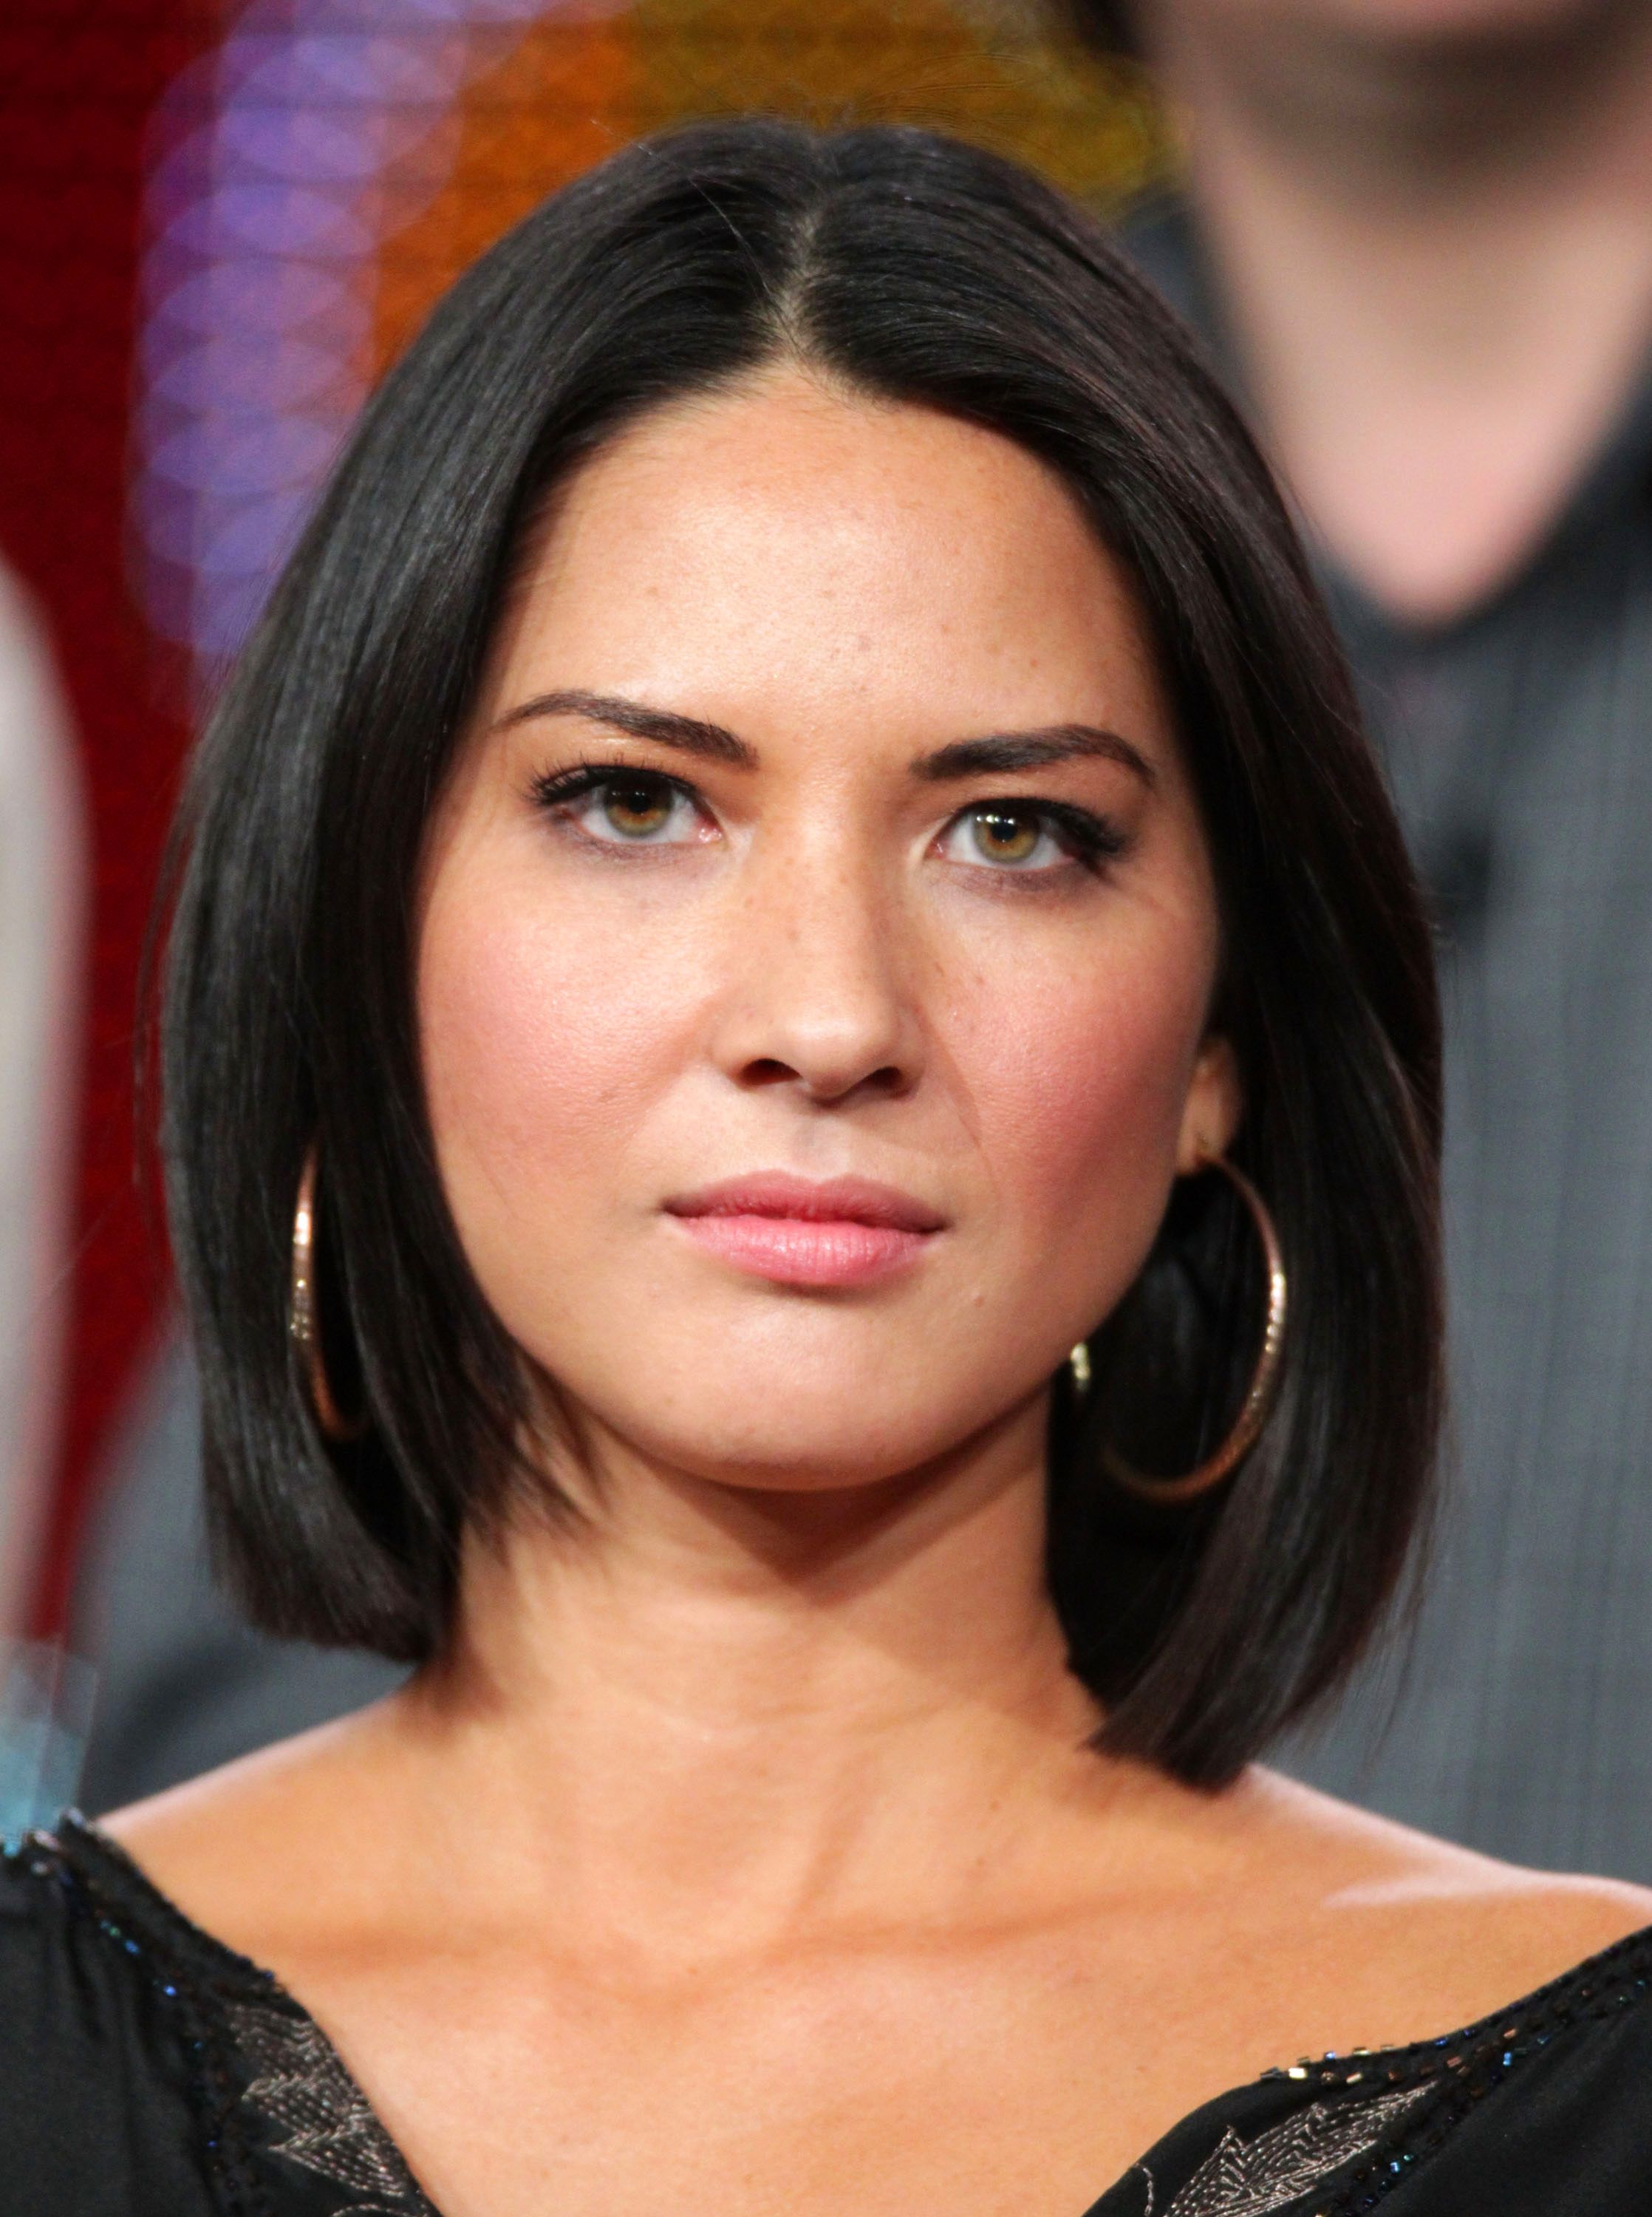 Pictures of Olivia Munn